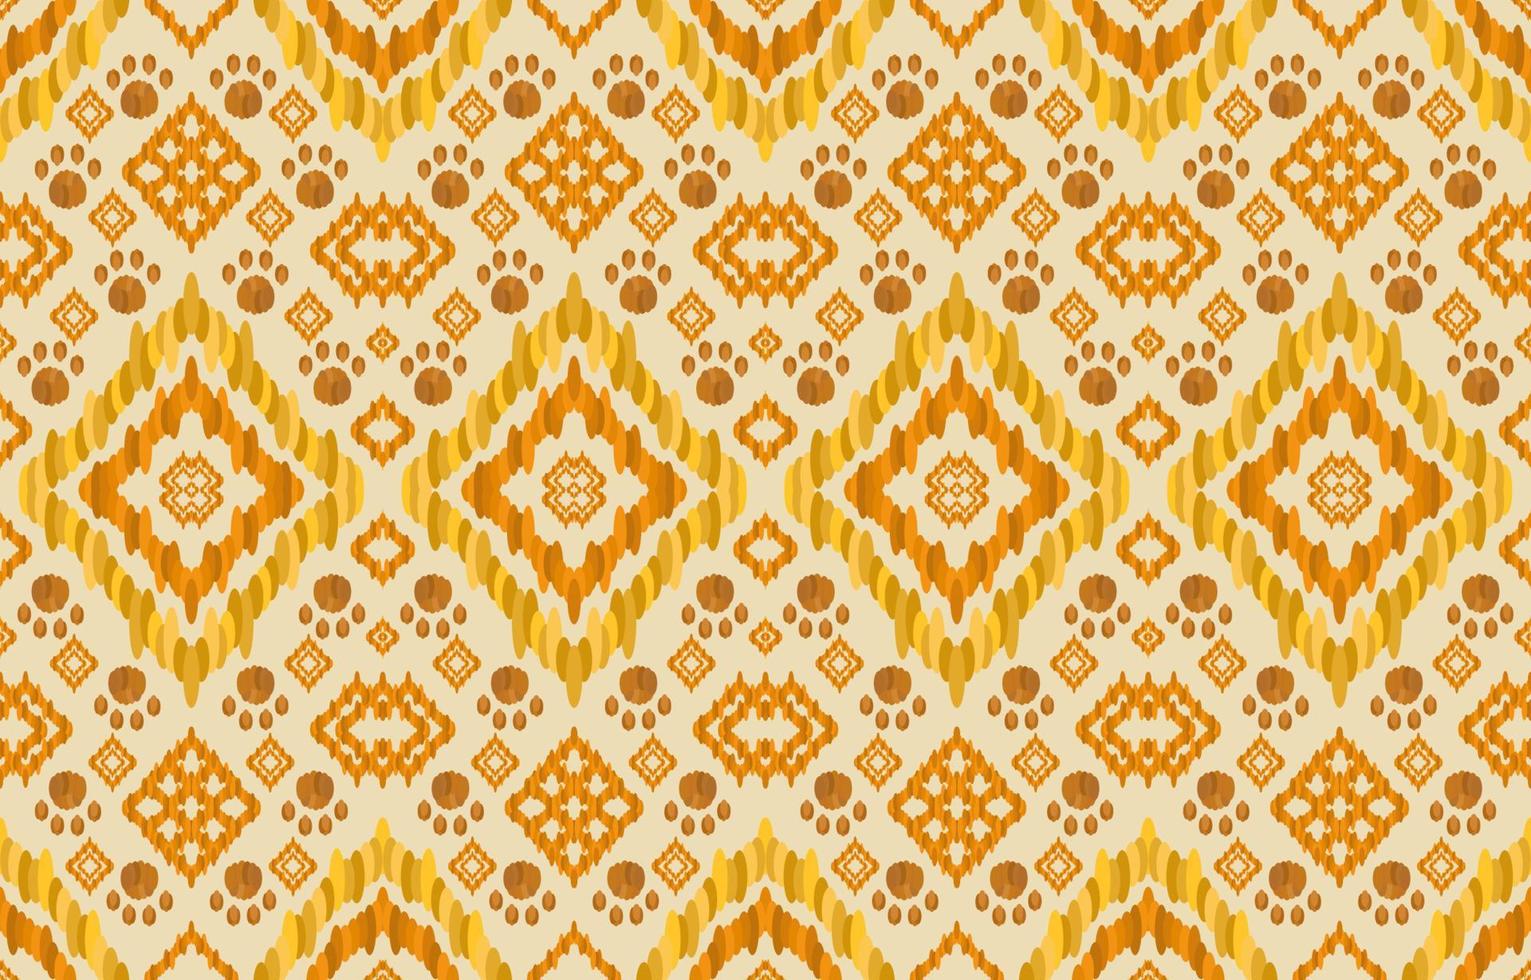 Golden yellow orange brown color ikat patterns. Geometric rice seed line and paw print tribal elegant luxury style. Ethnic fabric ikat seamless pattern. Asian folk vector design for clothing textile.